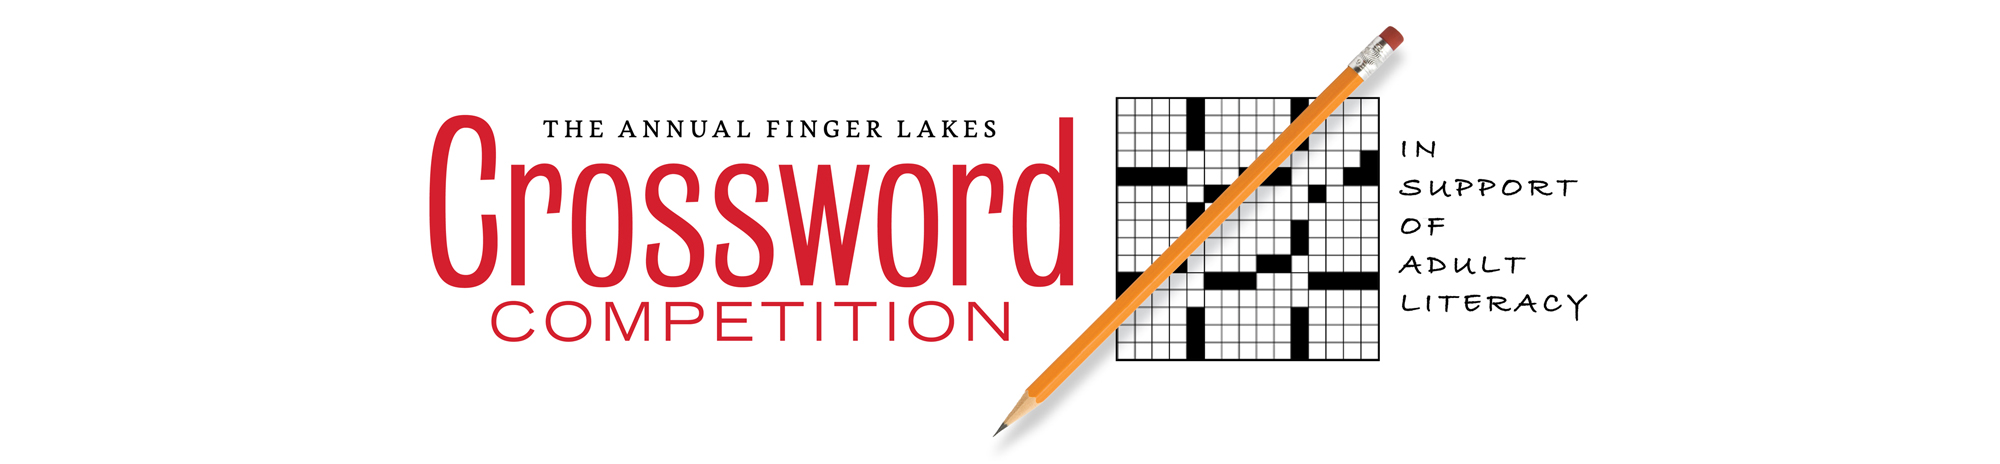 The Annual Finger Lakes Crossword Competition